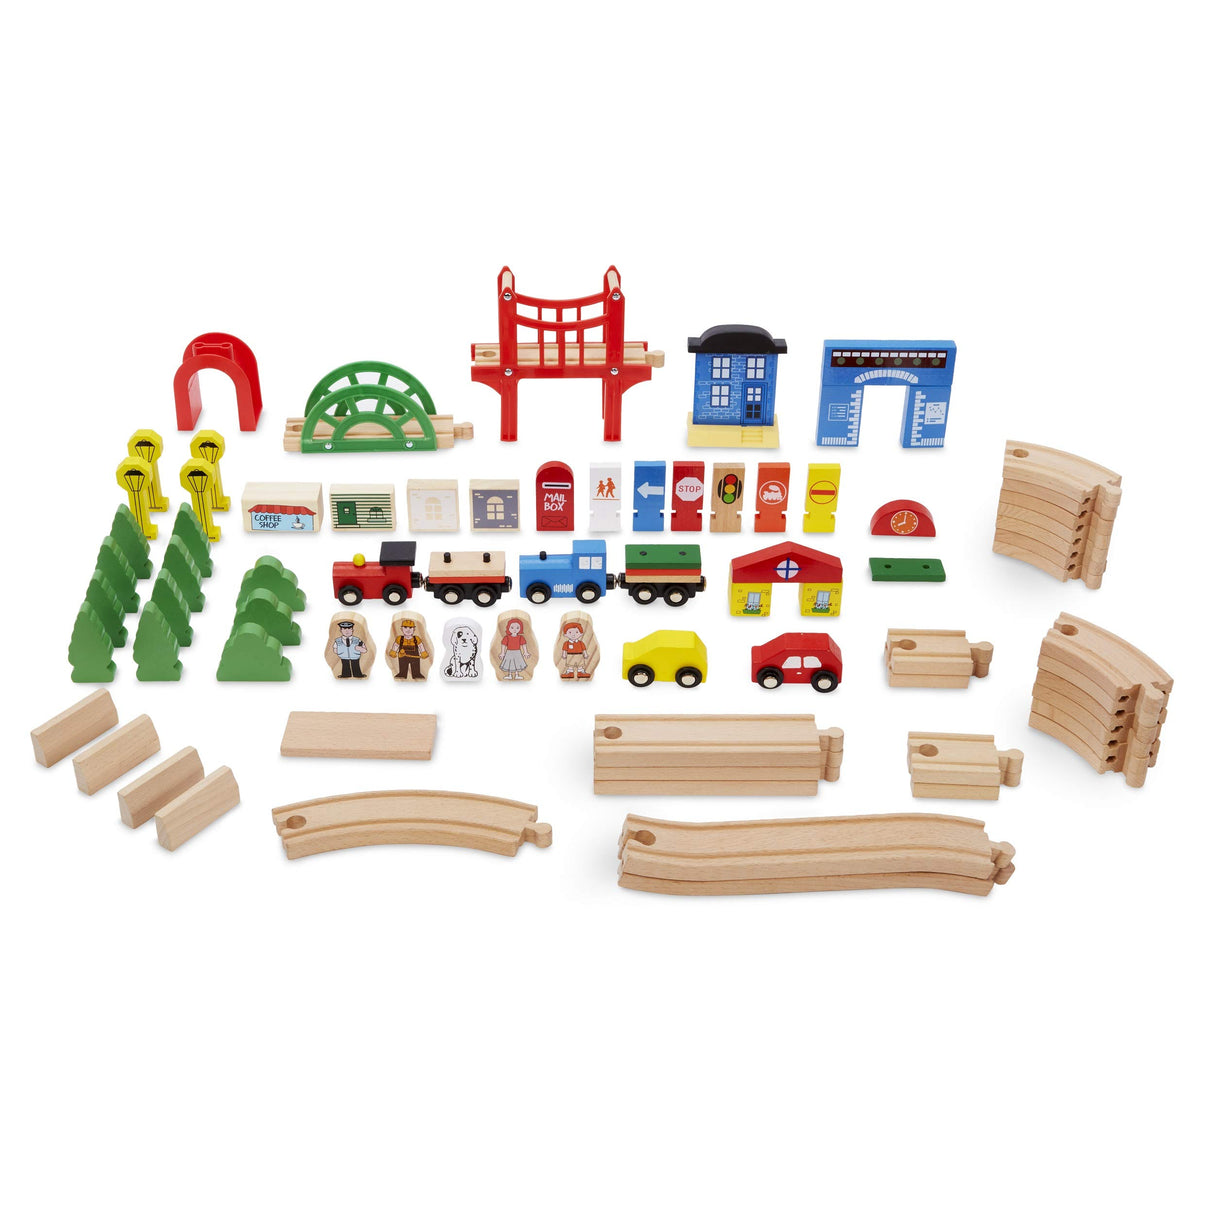 Little Tikes Real Wooden Train and Kids Table Set with Over 80 Multicolor Pieces Activity Table with Storage, Tracks, Trains, Cars, and More - Train Set Table Playset for Boys and Girls 3+ Years